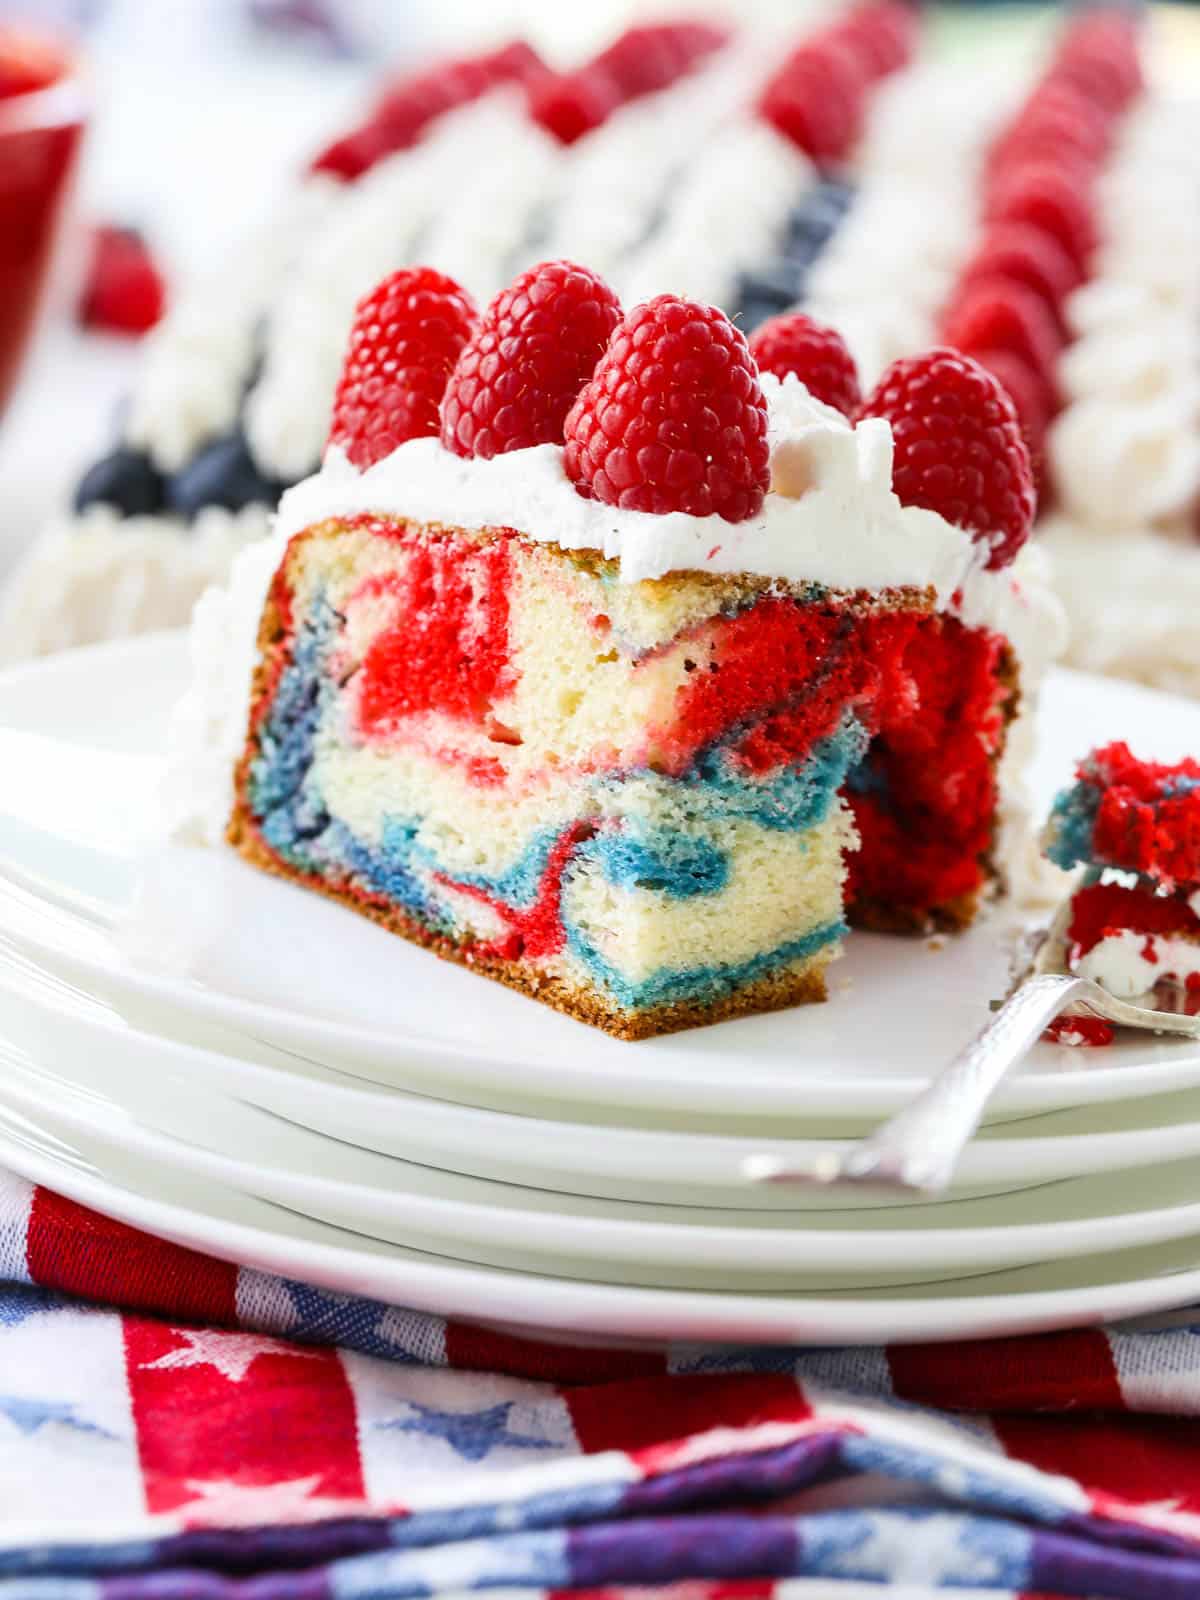 A slice of cake showing the red white and blue colors with a fork taking out a bite. 